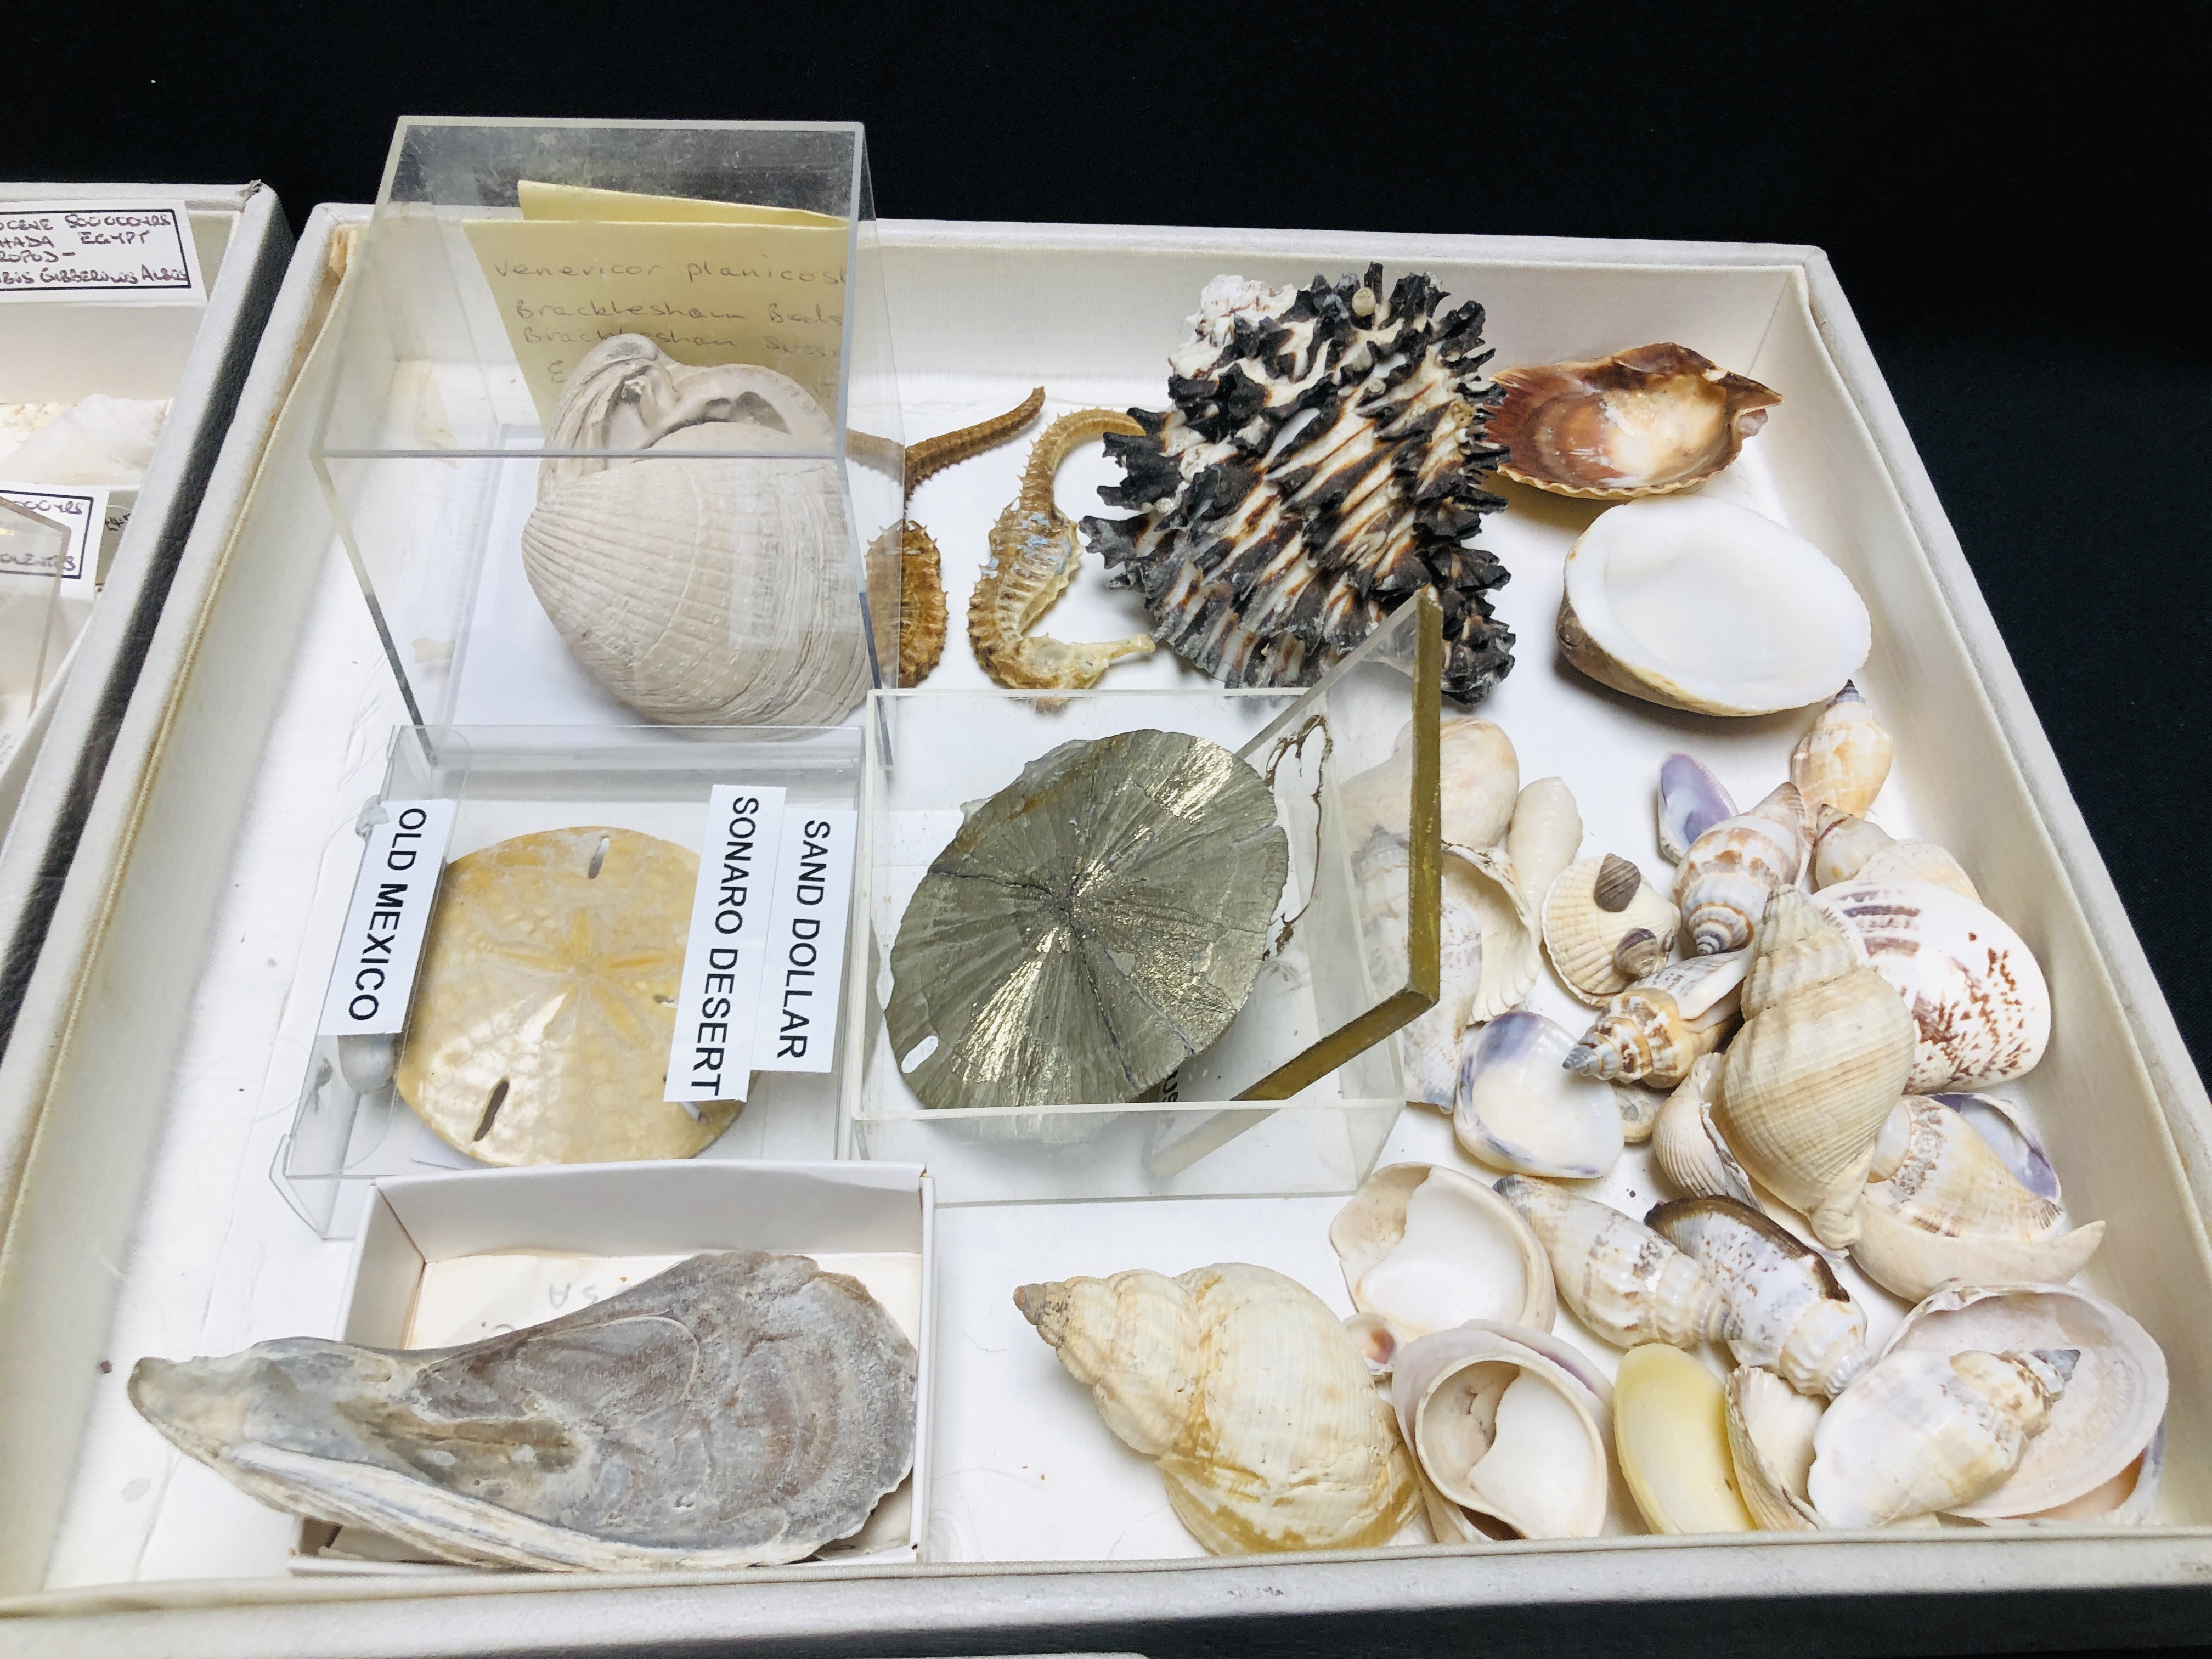 3 X TRAYS OF VARIOUS SEA SHELLS AND URCHINS TO INCLUDE PARECHINIDALE, SAND DOLLAR, SEAHORSES ETC. - Image 3 of 5